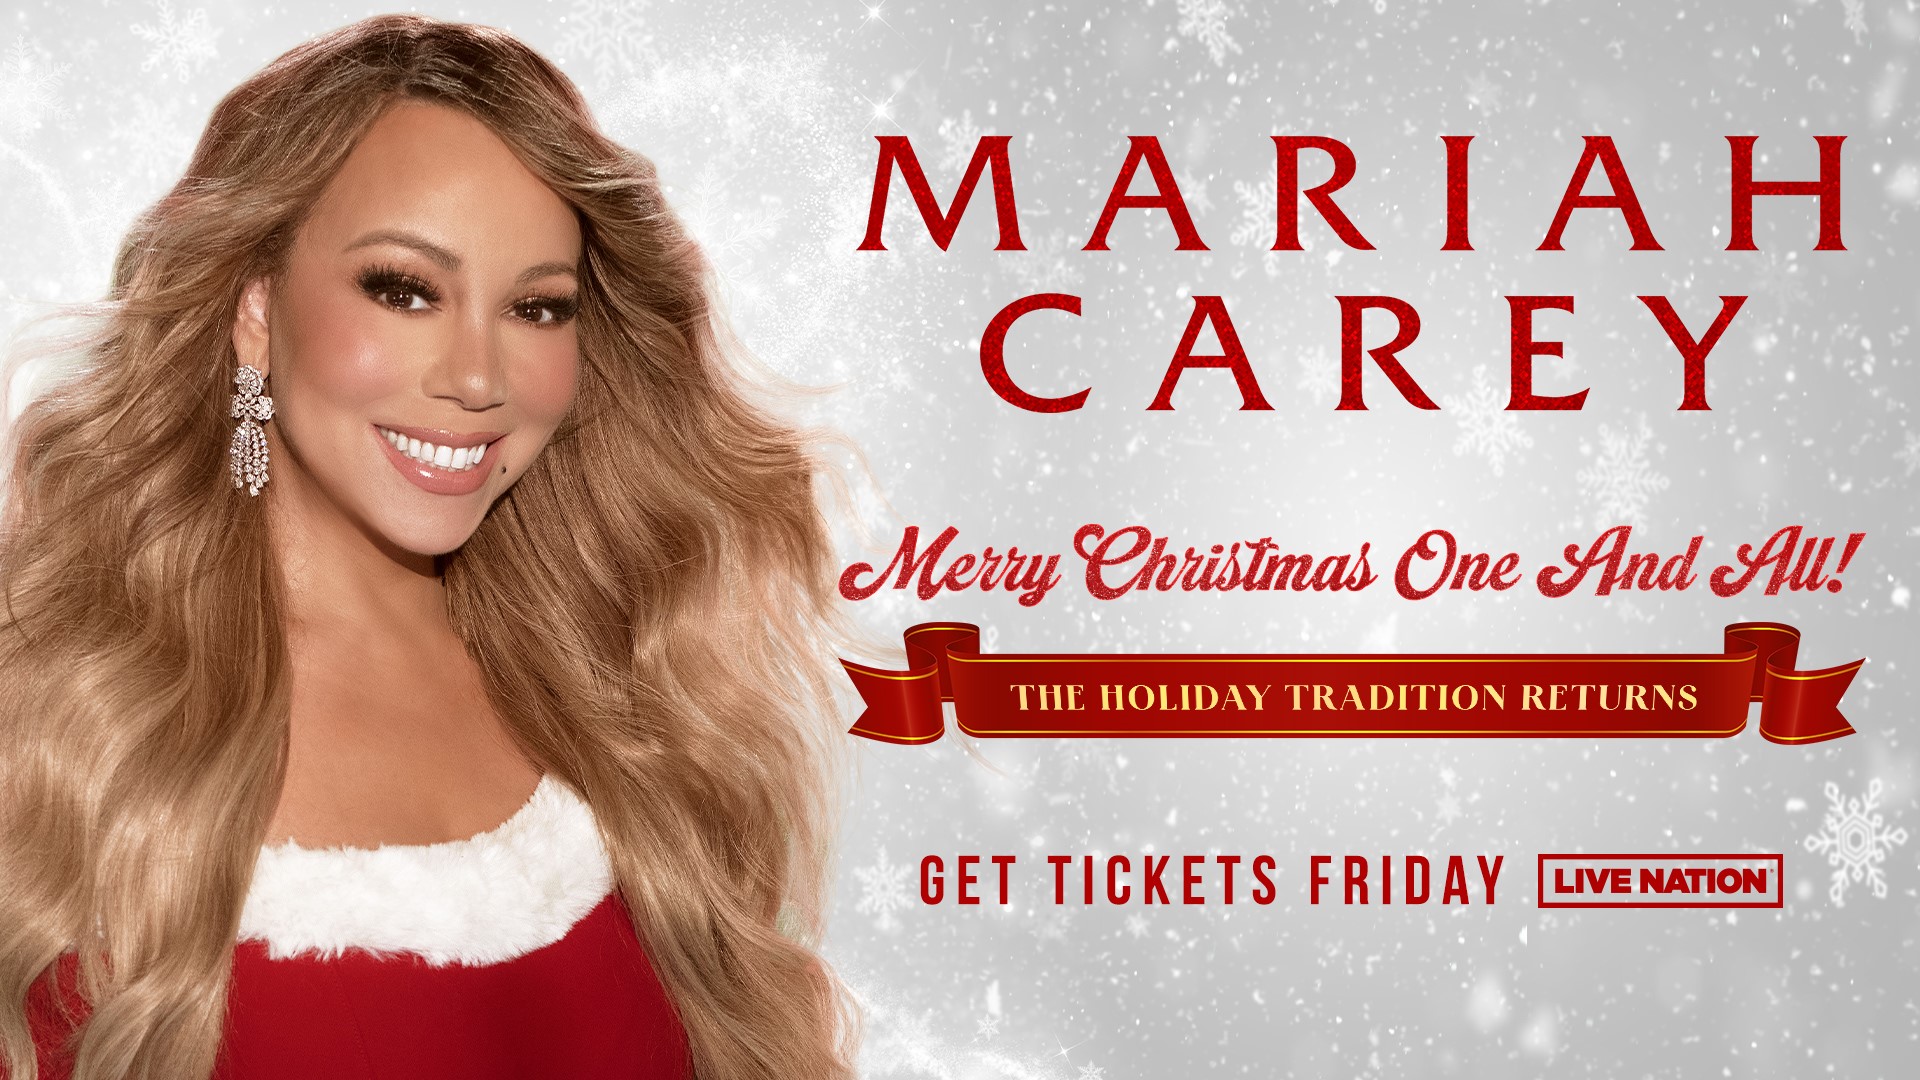 The "Merry Christmas One And All!" tour will make a Denver stop at Ball Arena on Tuesday, Nov. 21.